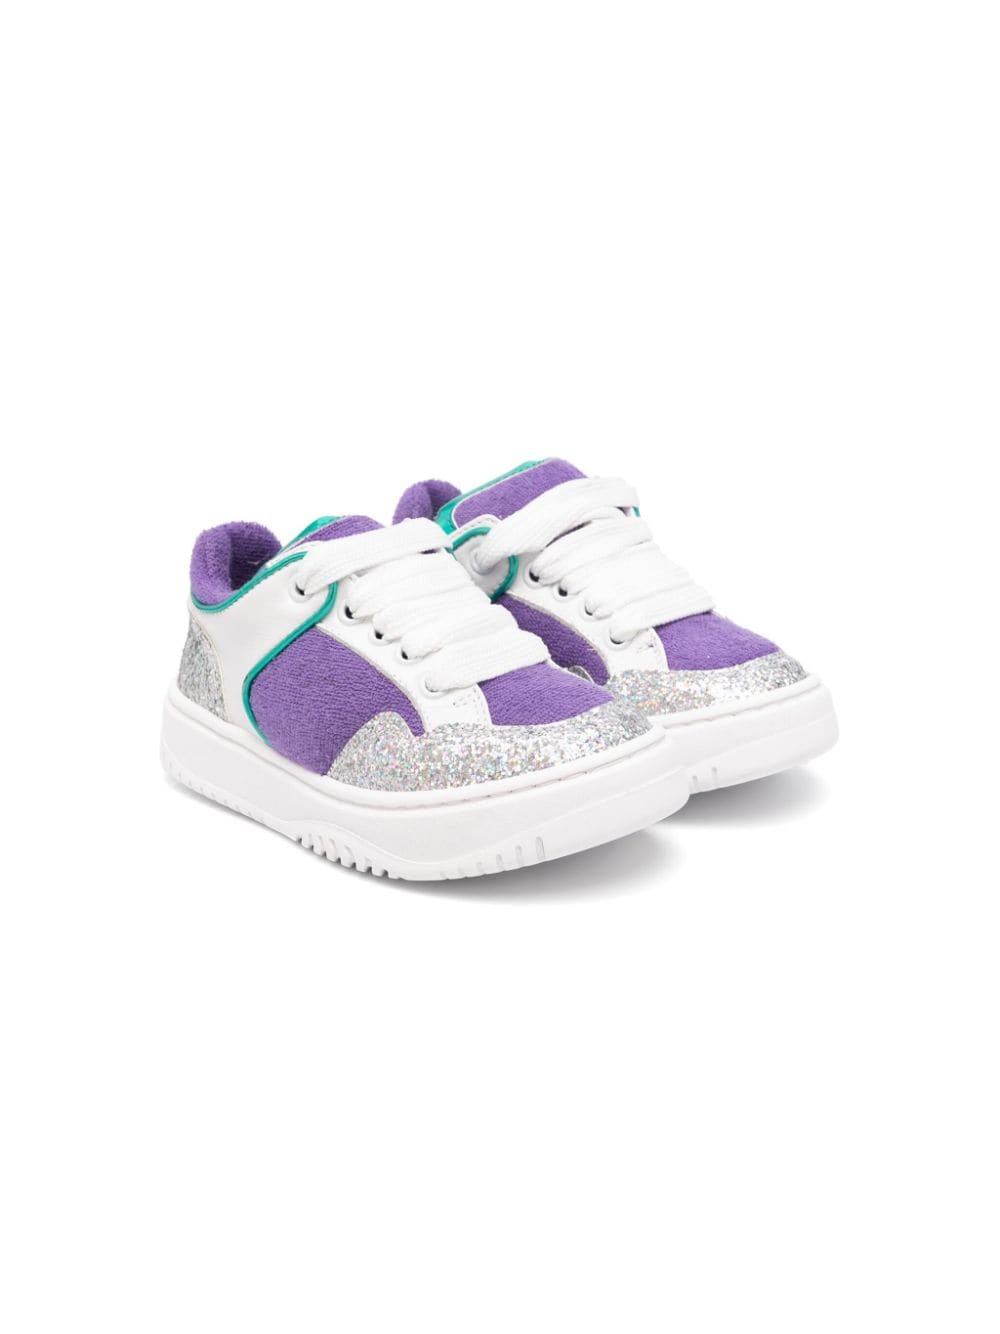 Andrea Montelpare Kids' Terry-cloth Glittered Sneakers In Purple